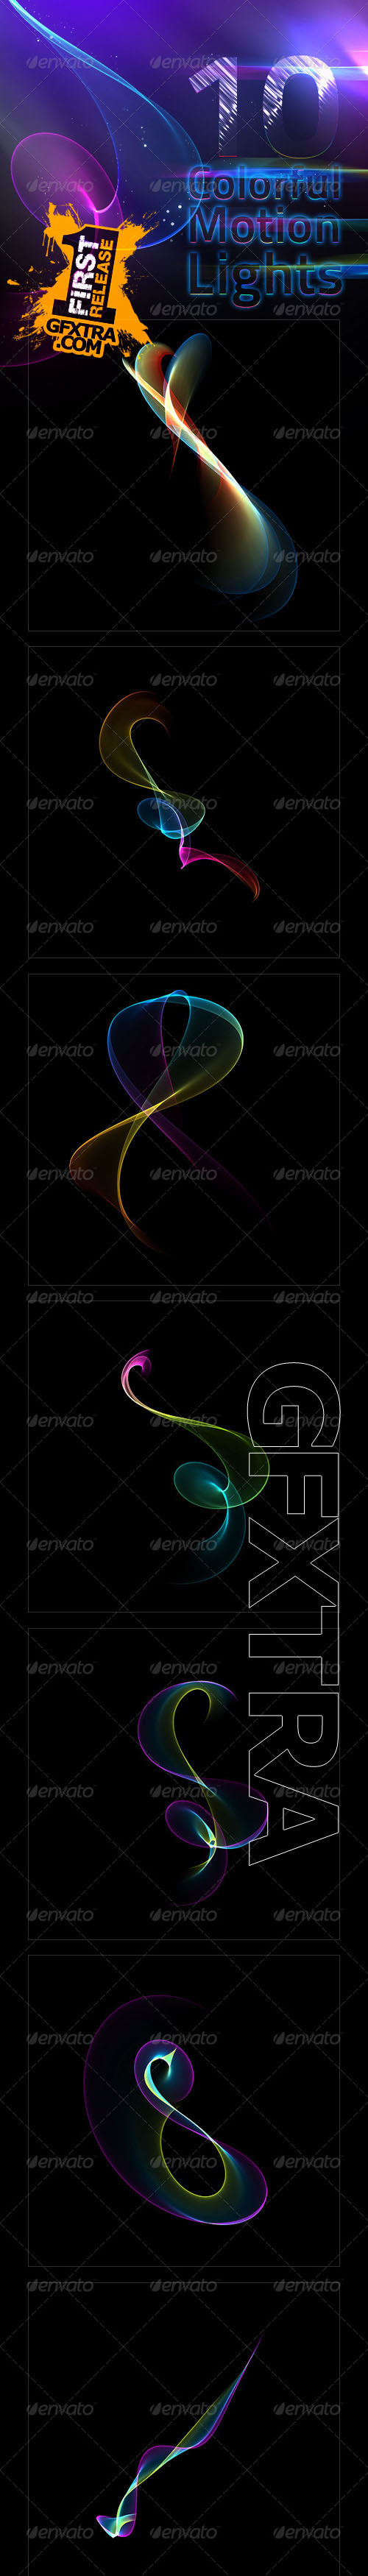 GraphicRiver - Abstract Motion Light Effects Pack 02 